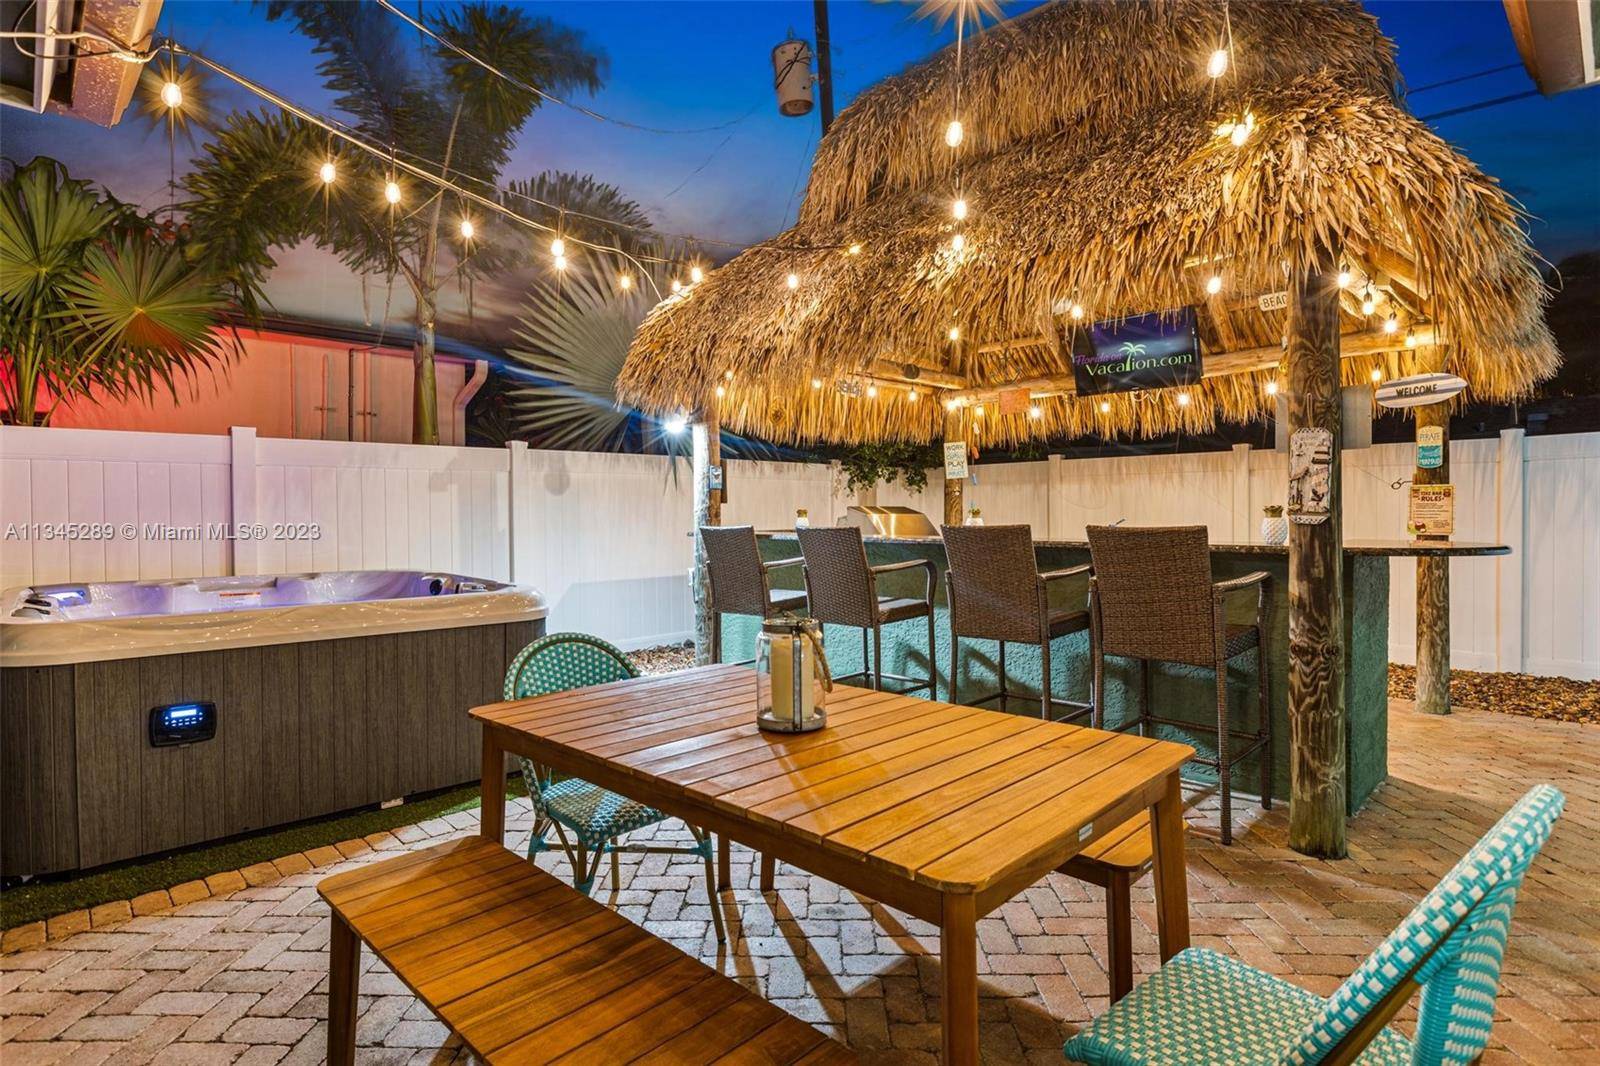 Beautiful vacation rental with 3 beds and 2 baths, open and spacious kitchen with granite top, stunning Tiki and ALFRESCO grill hut with granite, patio with rest and dining area, ...